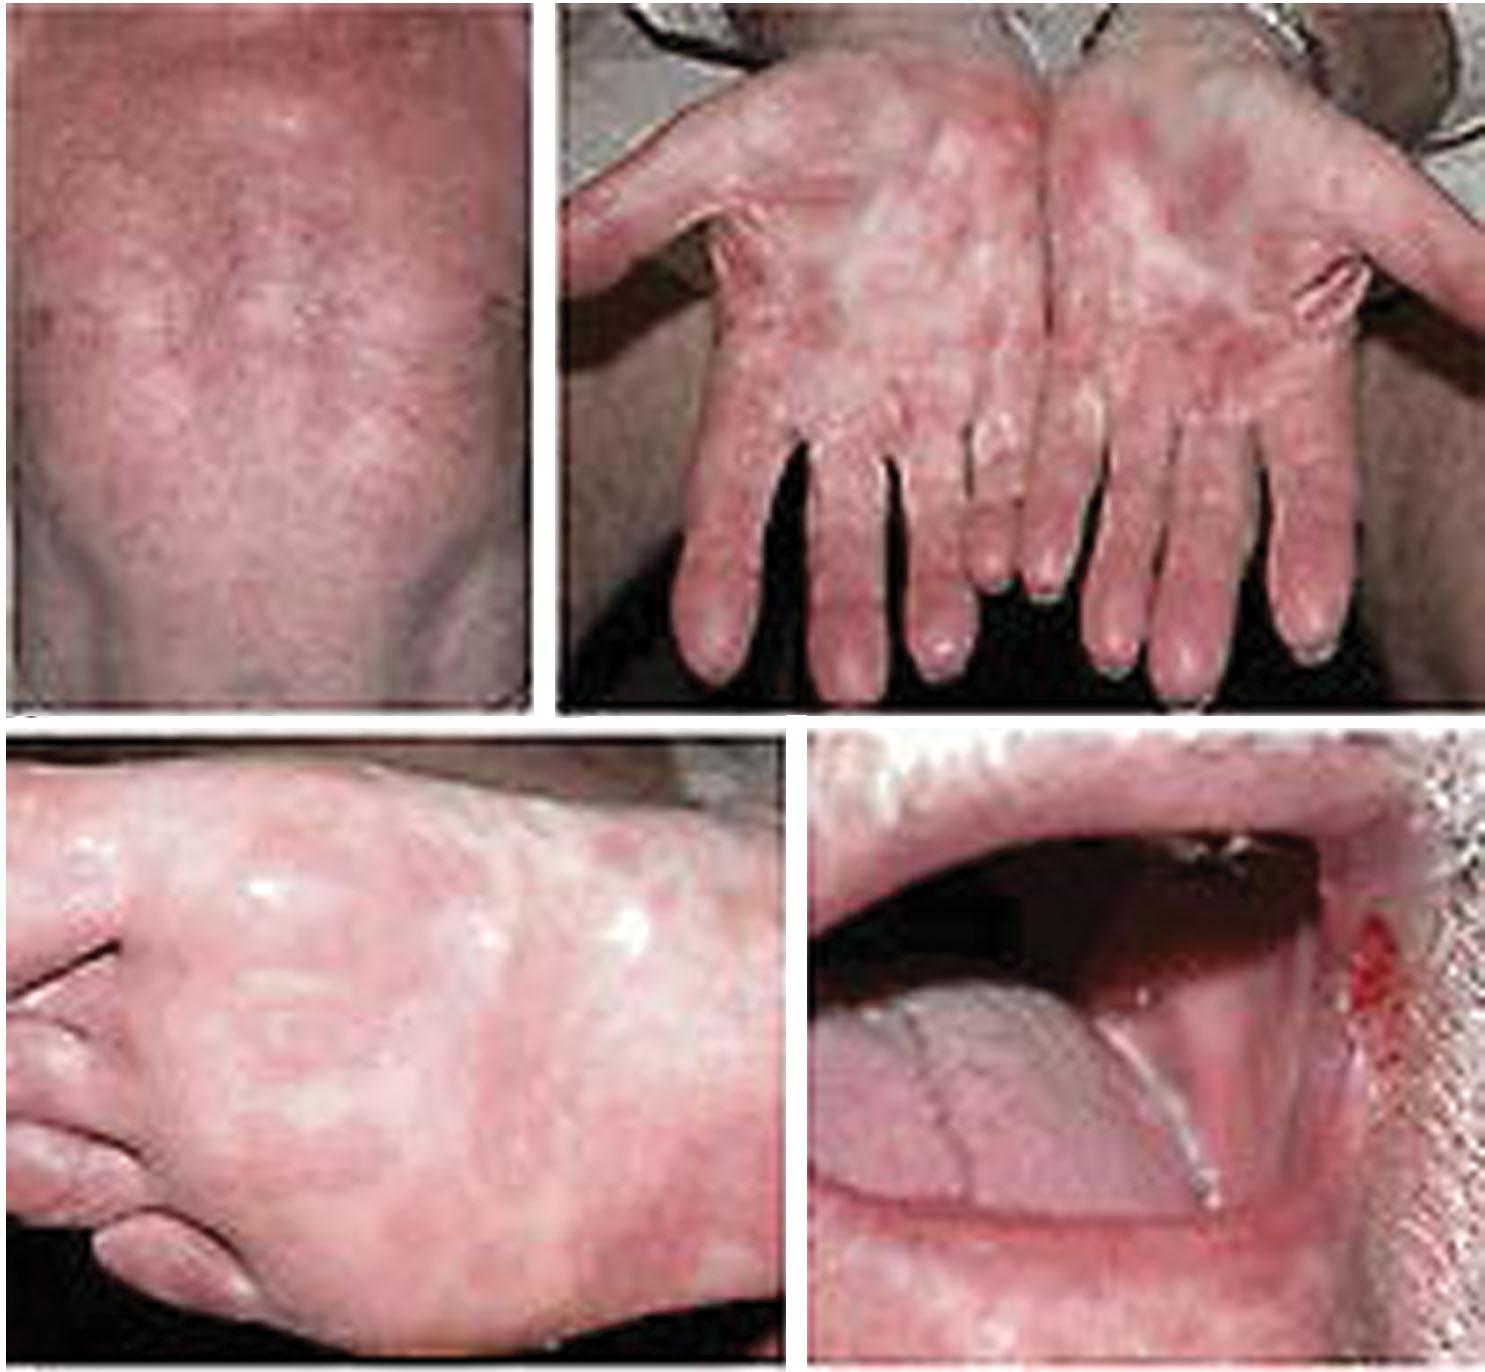 Fig. 23.13, Secondary syphilis: maculopapular rash. Characteristic maculopapular rash of secondary syphilis affecting the trunk (A), palms (B), and soles (C). (D) Angular mouth ulcer in the same patient.